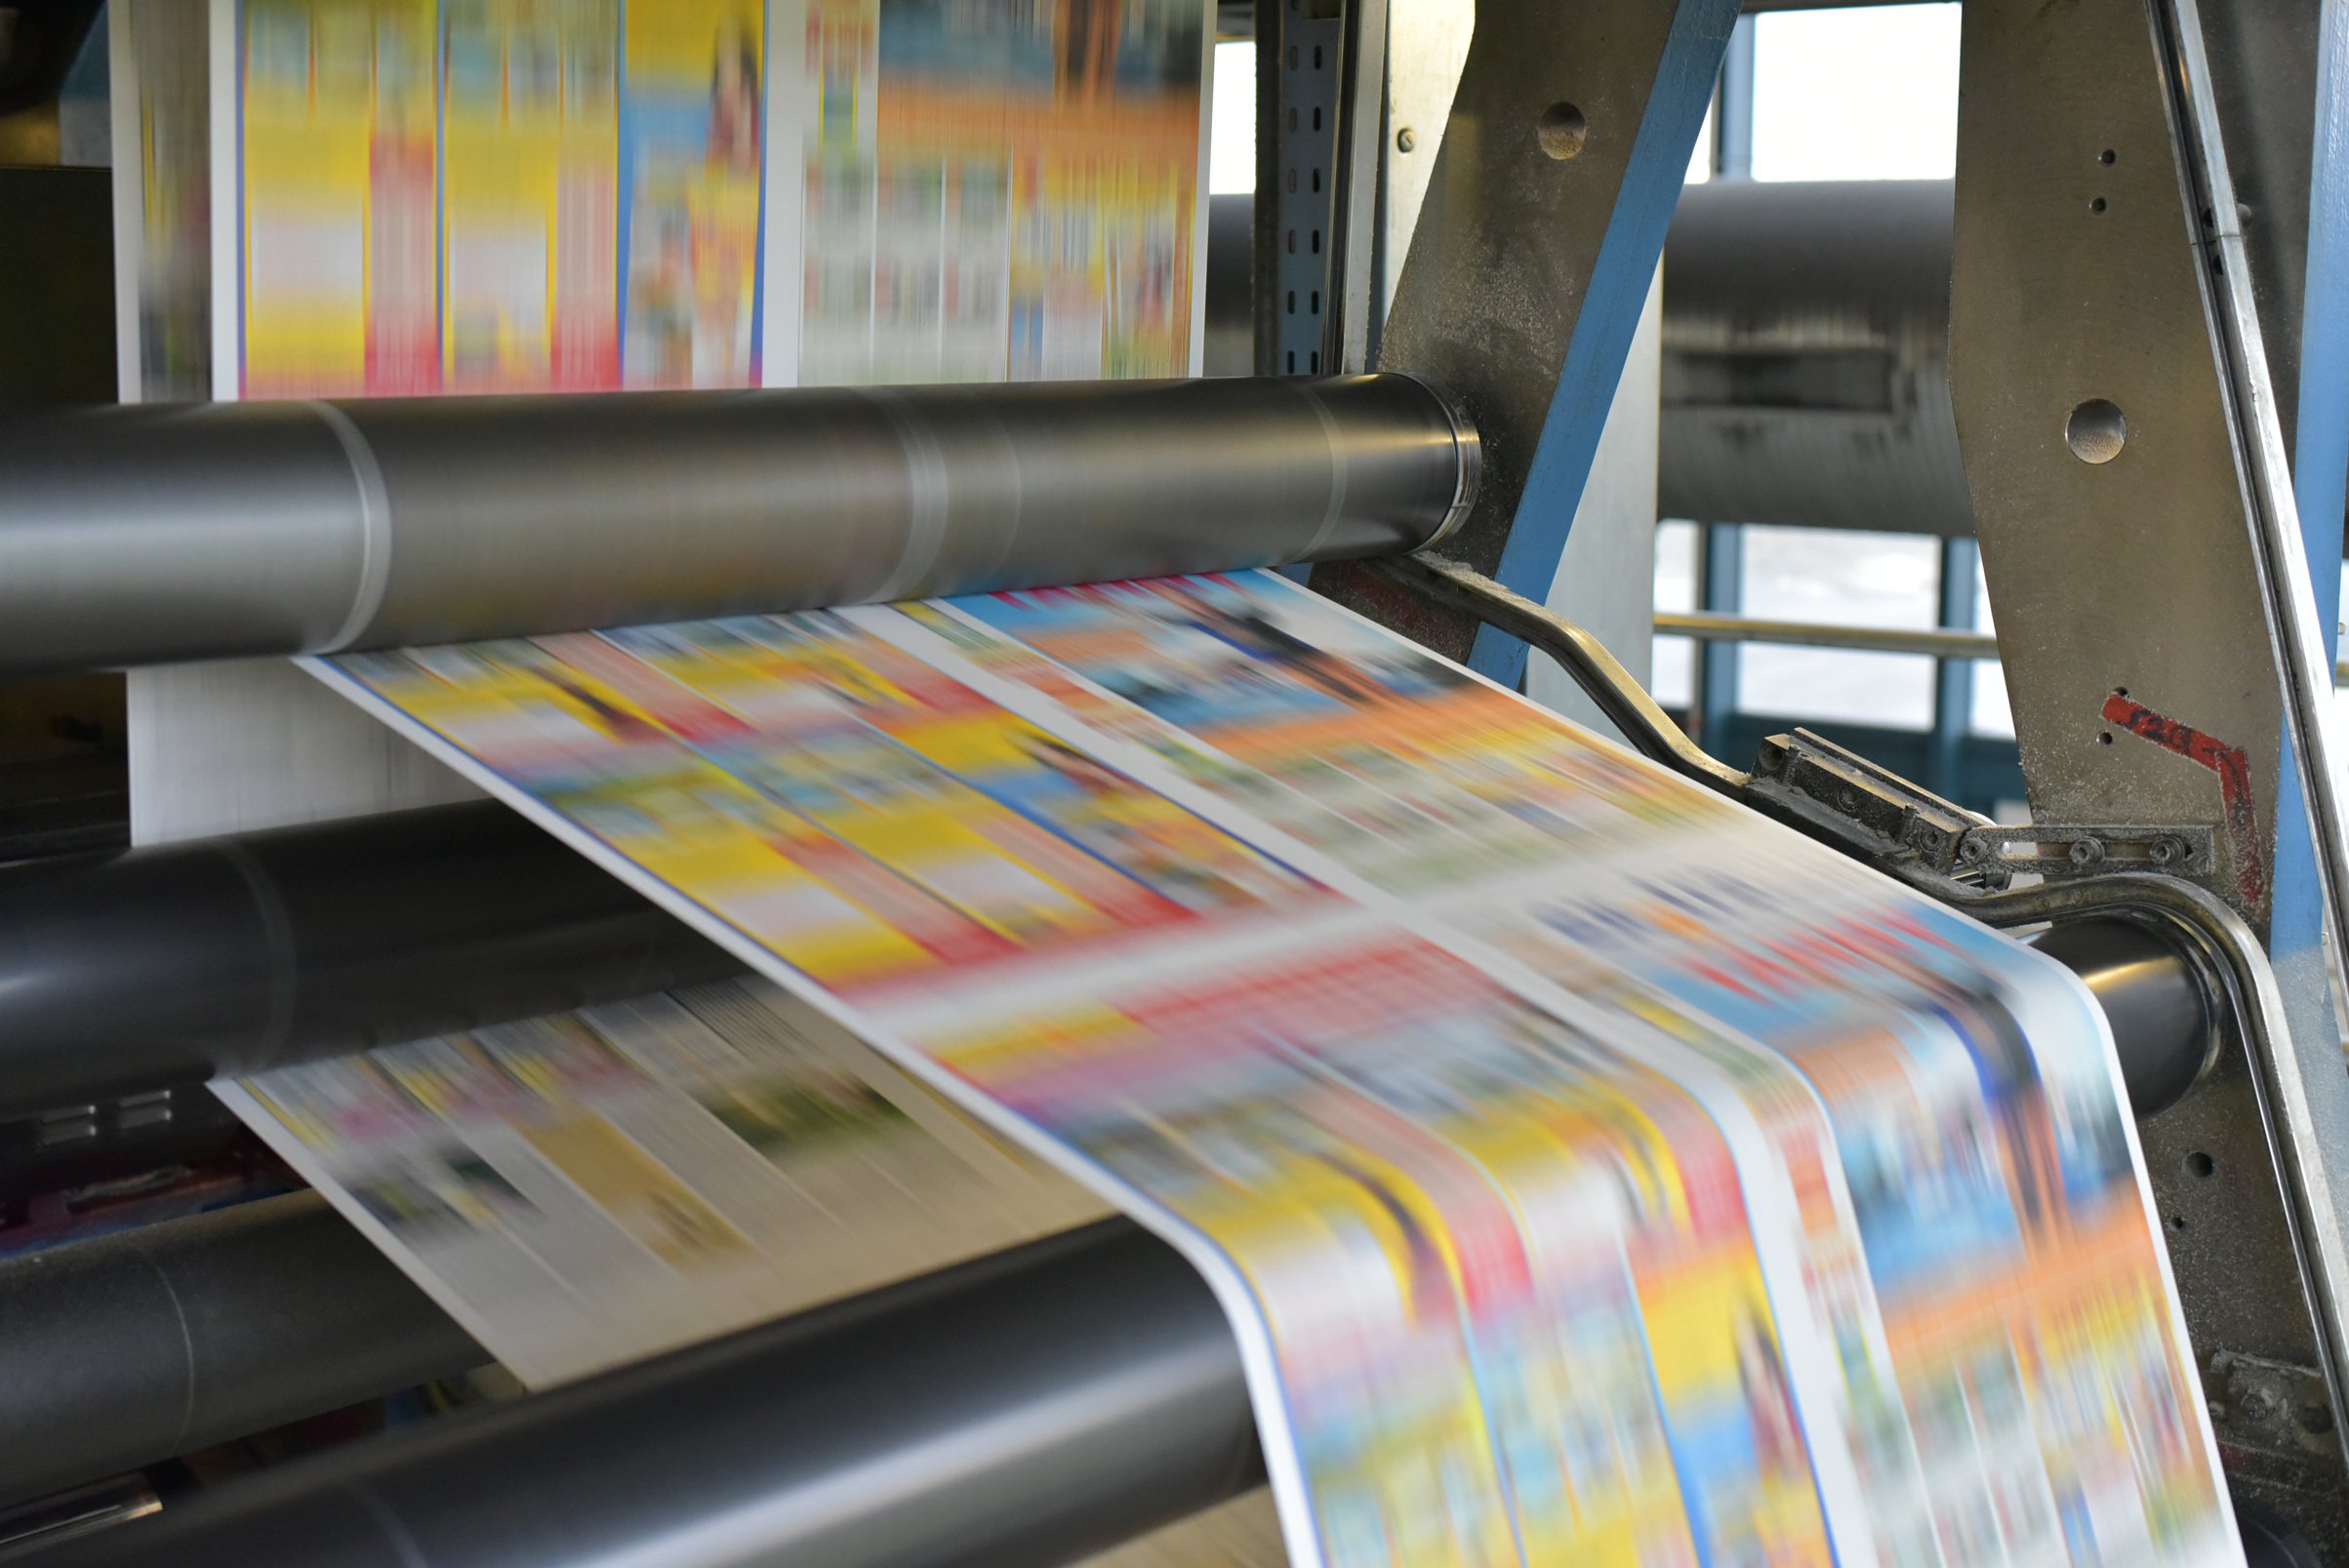 roll offset print machine in a large print shop for production of newspapers & magazines